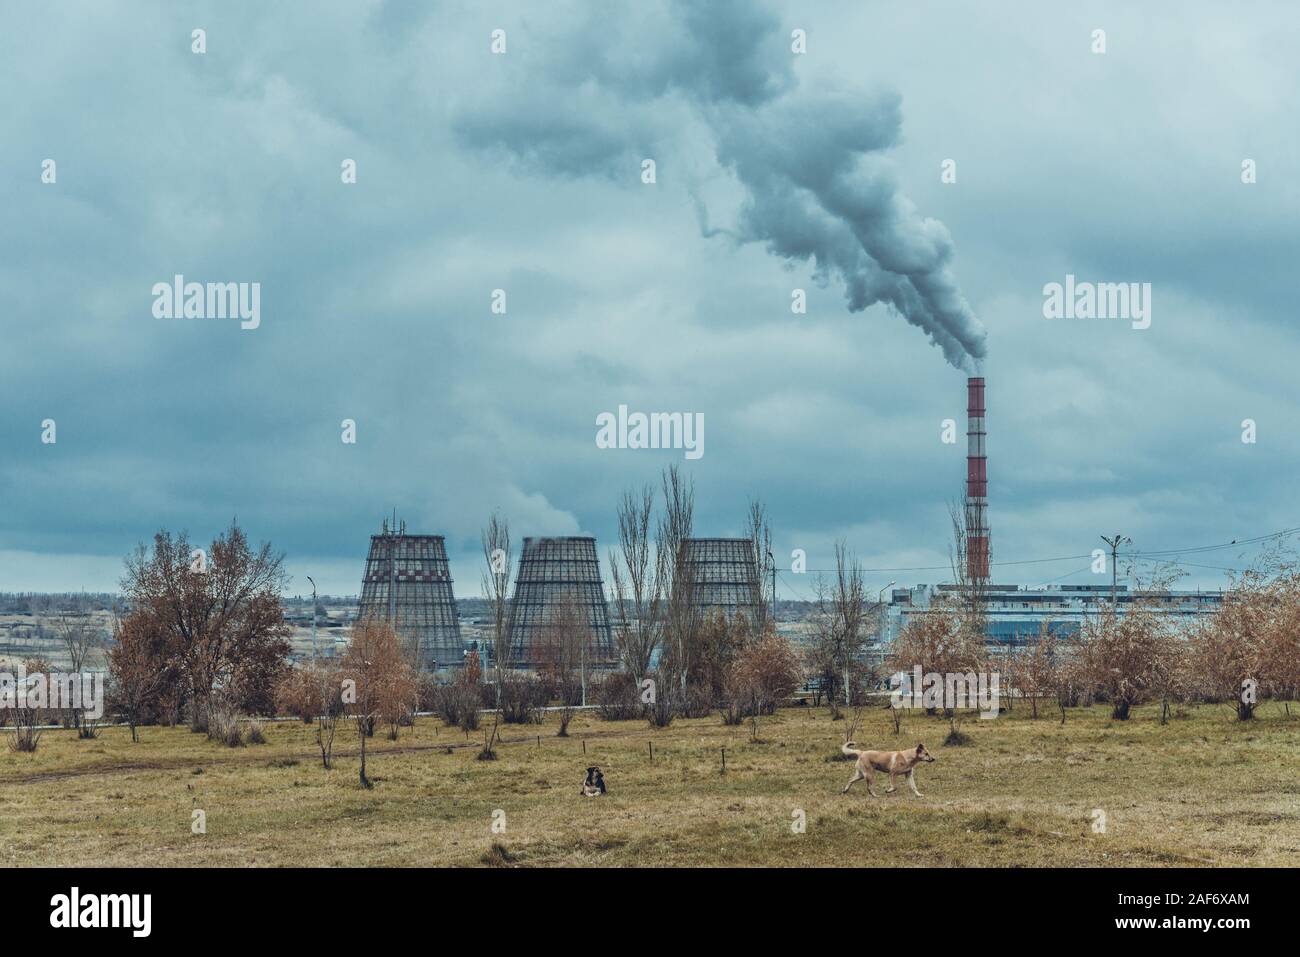 of large pipes belching smoke from thermal power plants Stock Photo